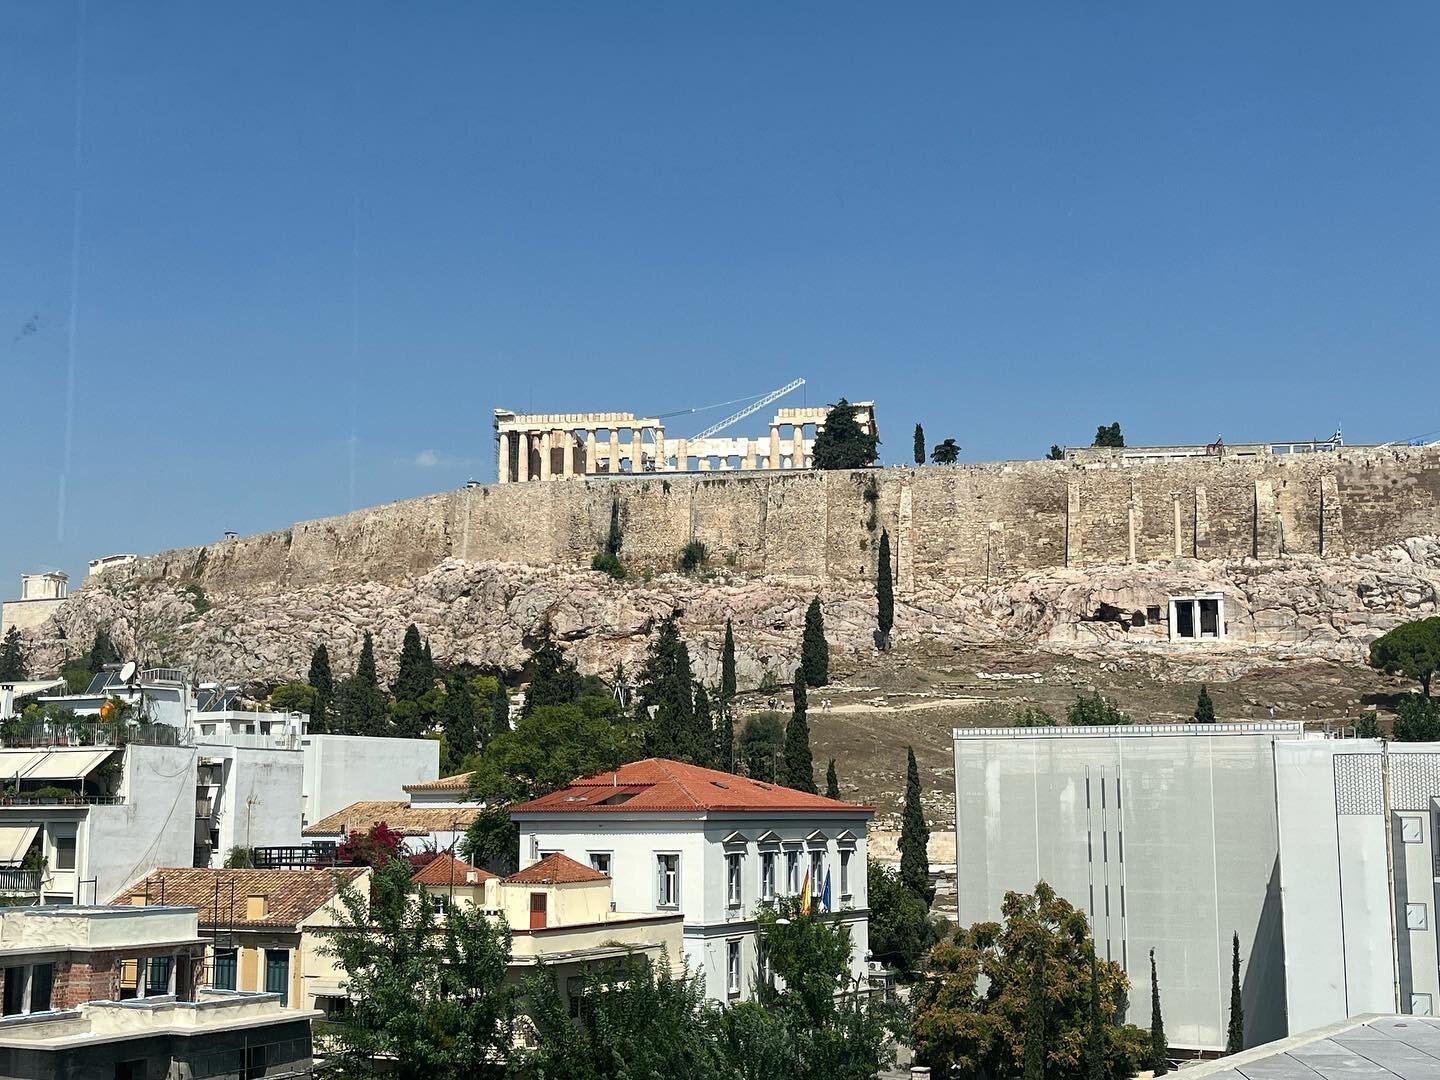 Views from the Acropolis in Athens, Greece. 

Don&rsquo;t you want this view? Enter to win our raffle, 1st Prize: Trip to Greece. 5 tickets for $20 or 1 ticket for $5.

Saturday, September 17, 2022: 11am-9pm
Sunday, September 18, 2022: 12pm-6pm

614 